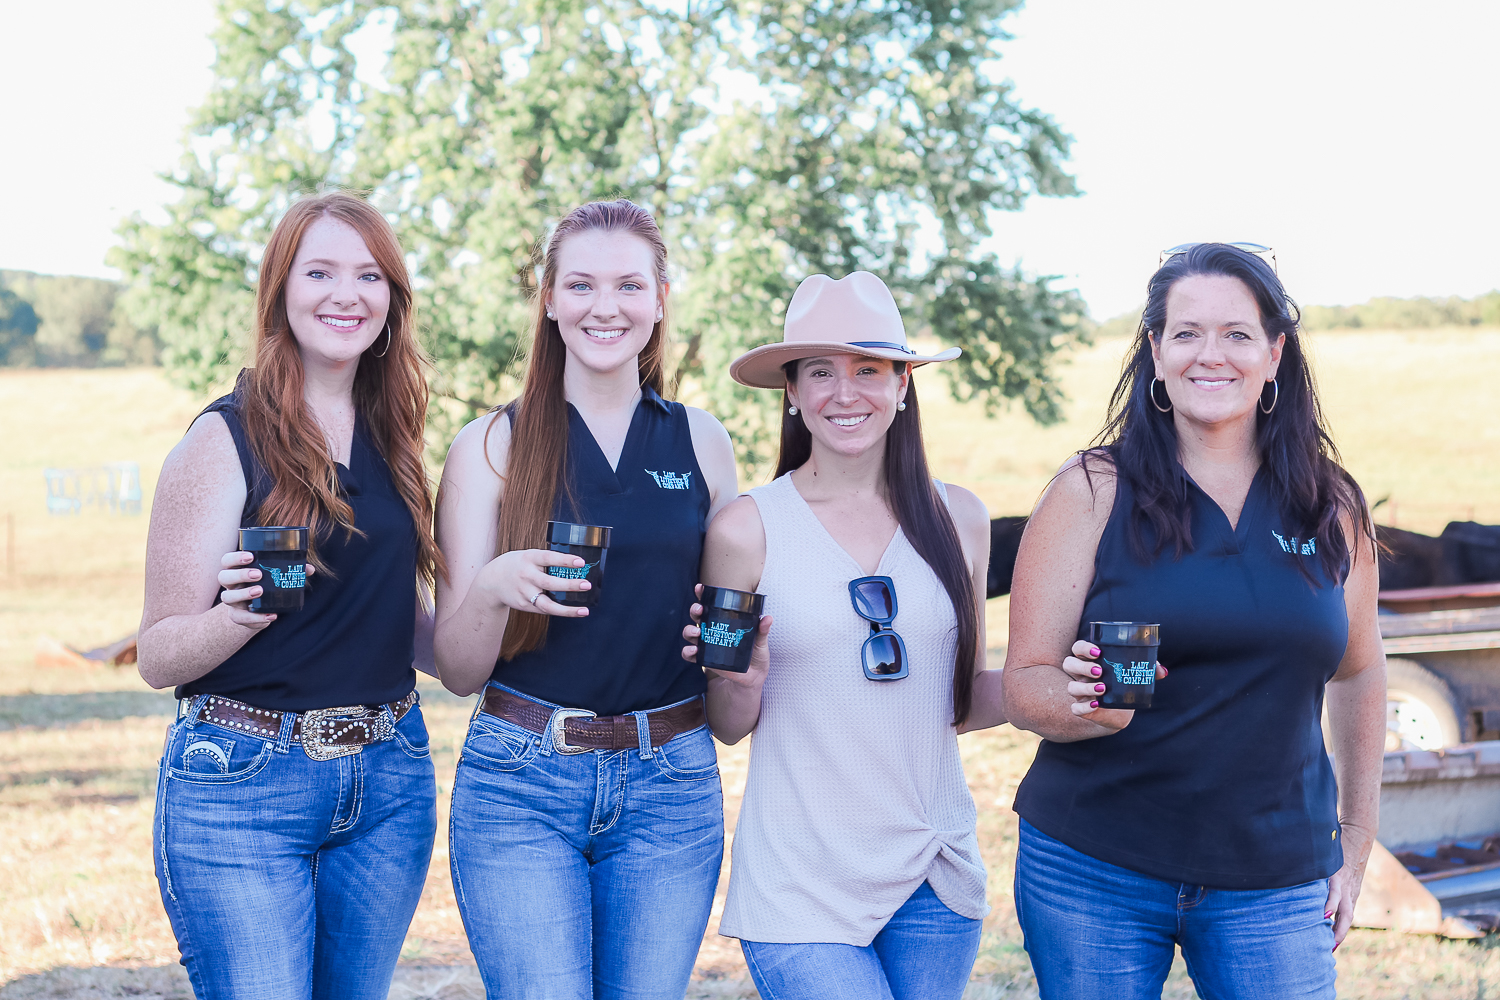 Staci, Macey, and Emma Hurst, owners and operators of Lady Livestock, an angus beef cattle farm in Jefferson City, Missouri